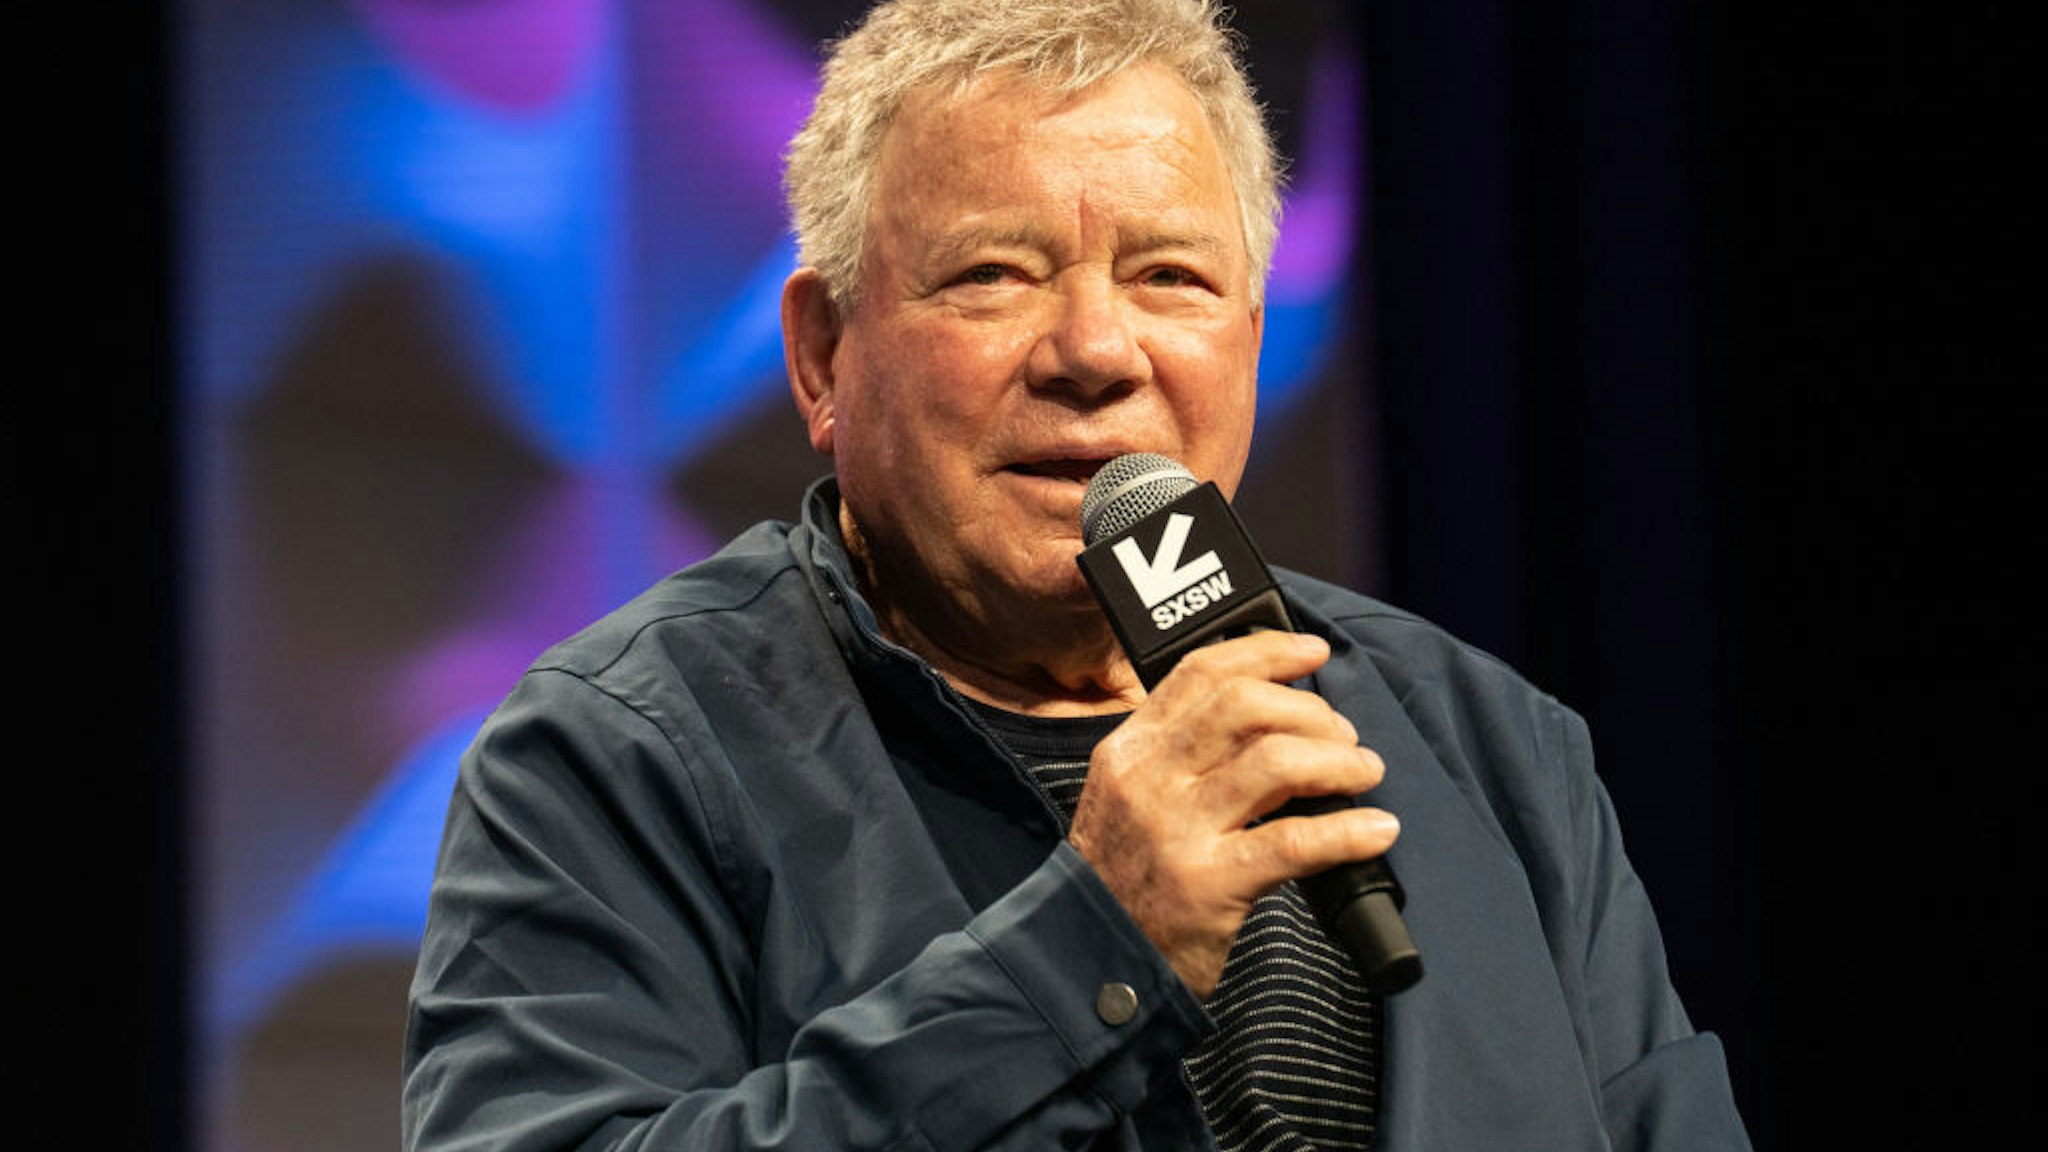 AUSTIN, TEXAS - MARCH 16: William Shatner speaks onstage at " Keynote: William Shatner in Conversation with Tim League" during the 2023 SXSW Conference and Festivals at Austin Convention Center on March 16, 2023 in Austin, Texas.